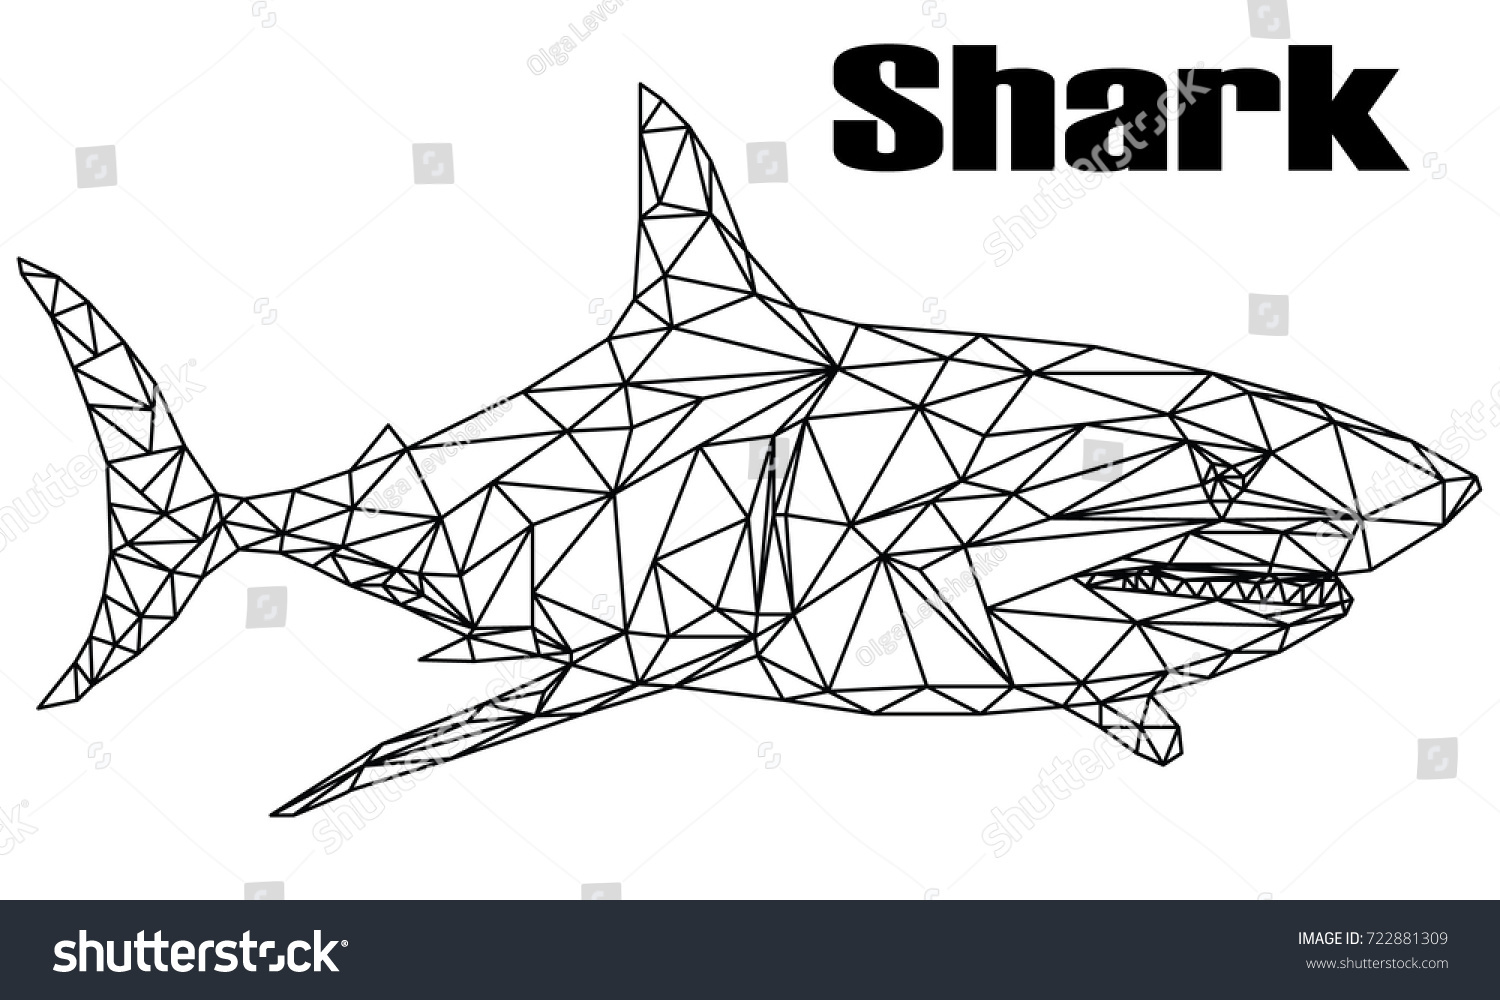 Shark low poly style business concept stock vector royalty free